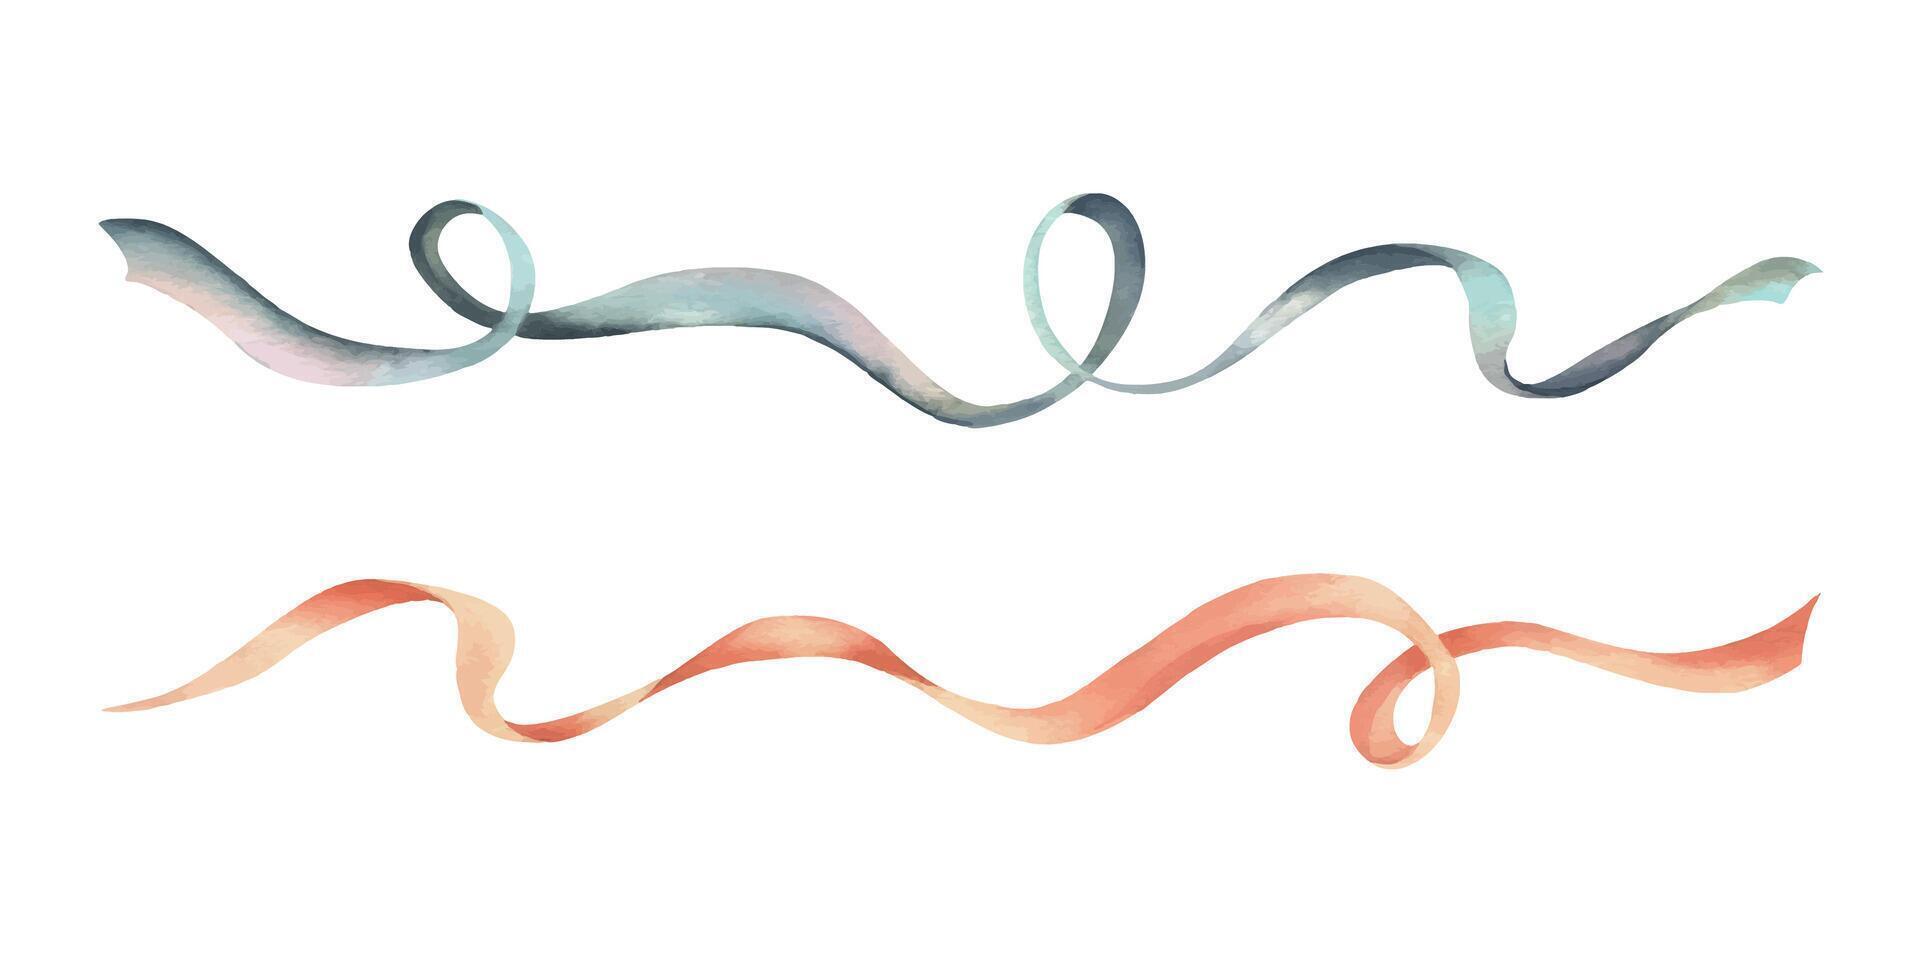 Long twisted satin and silk ribbons in peach fuzz and blue-turquoise colors. Hand drawn watercolor illustration. Set of elements isolated from background. vector